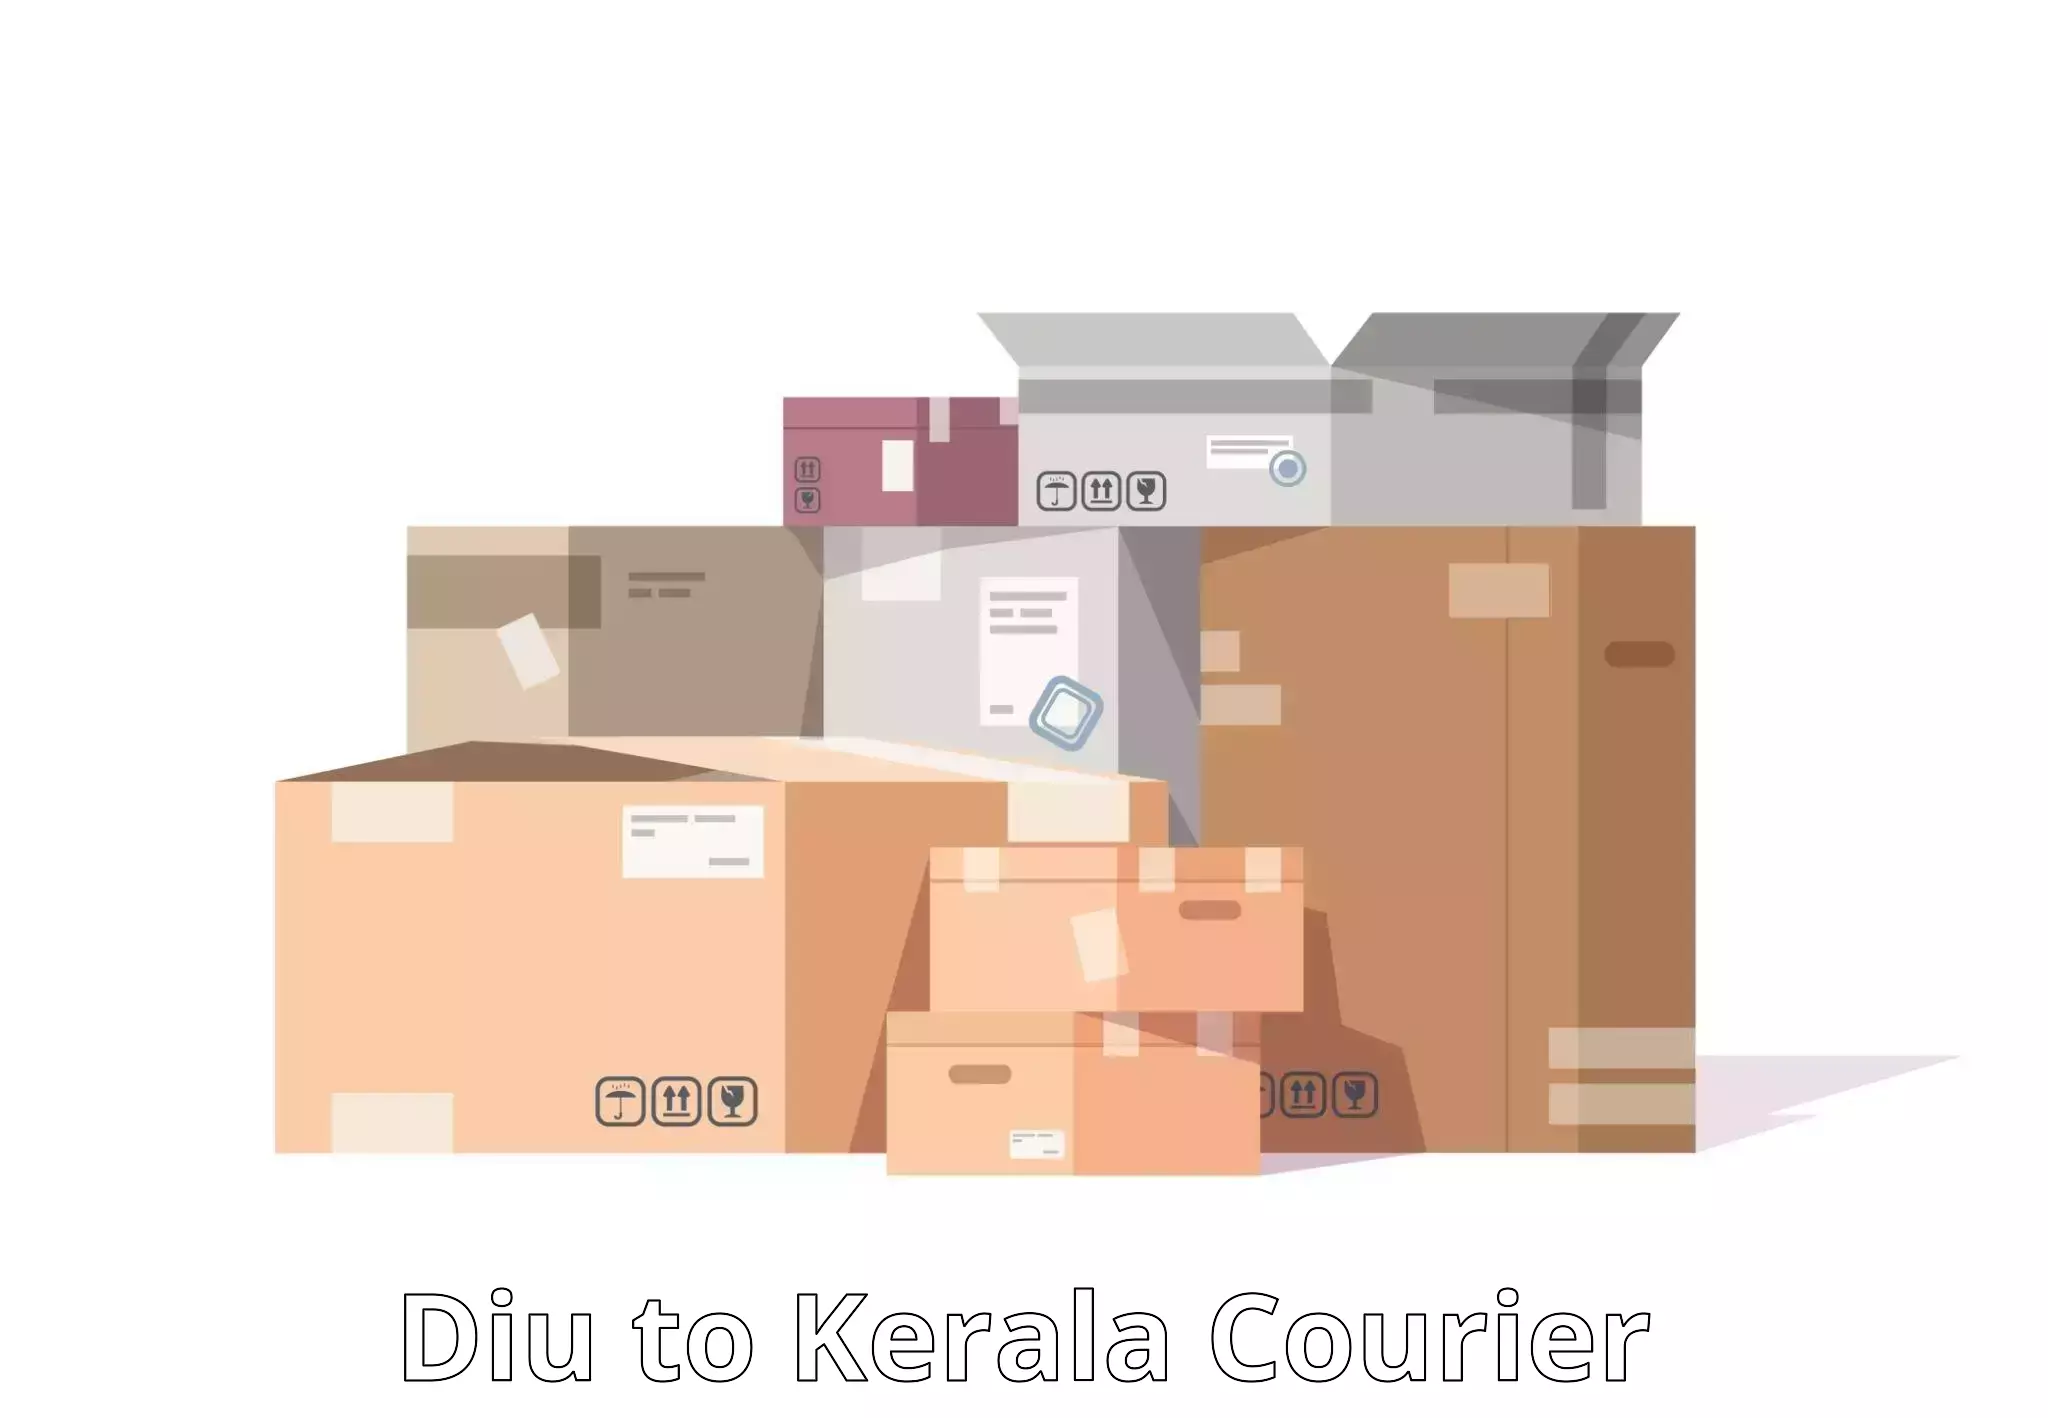 Small business couriers in Diu to Karukachal